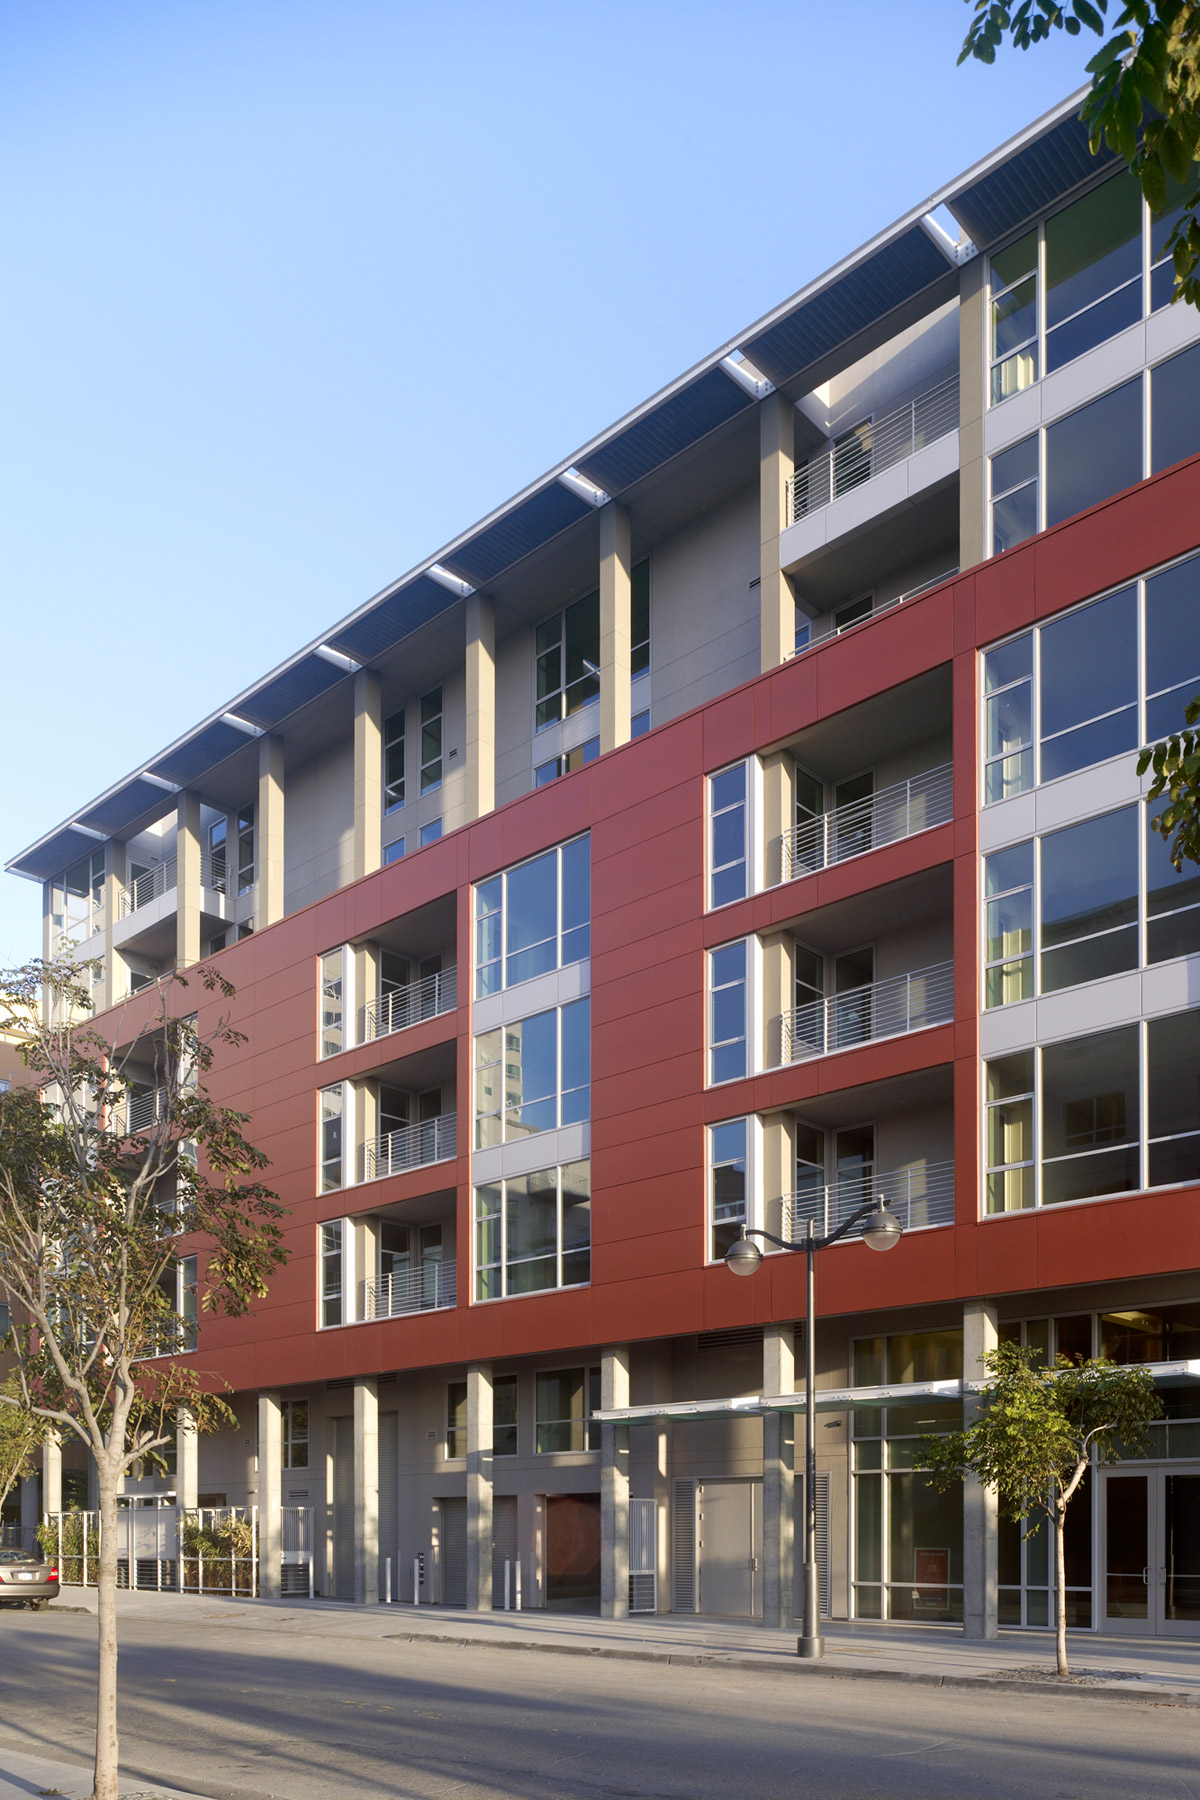 235 Berry Street is one of the first housing developments to be built in San Francisco’s emerging Mission Bay neighborhood.